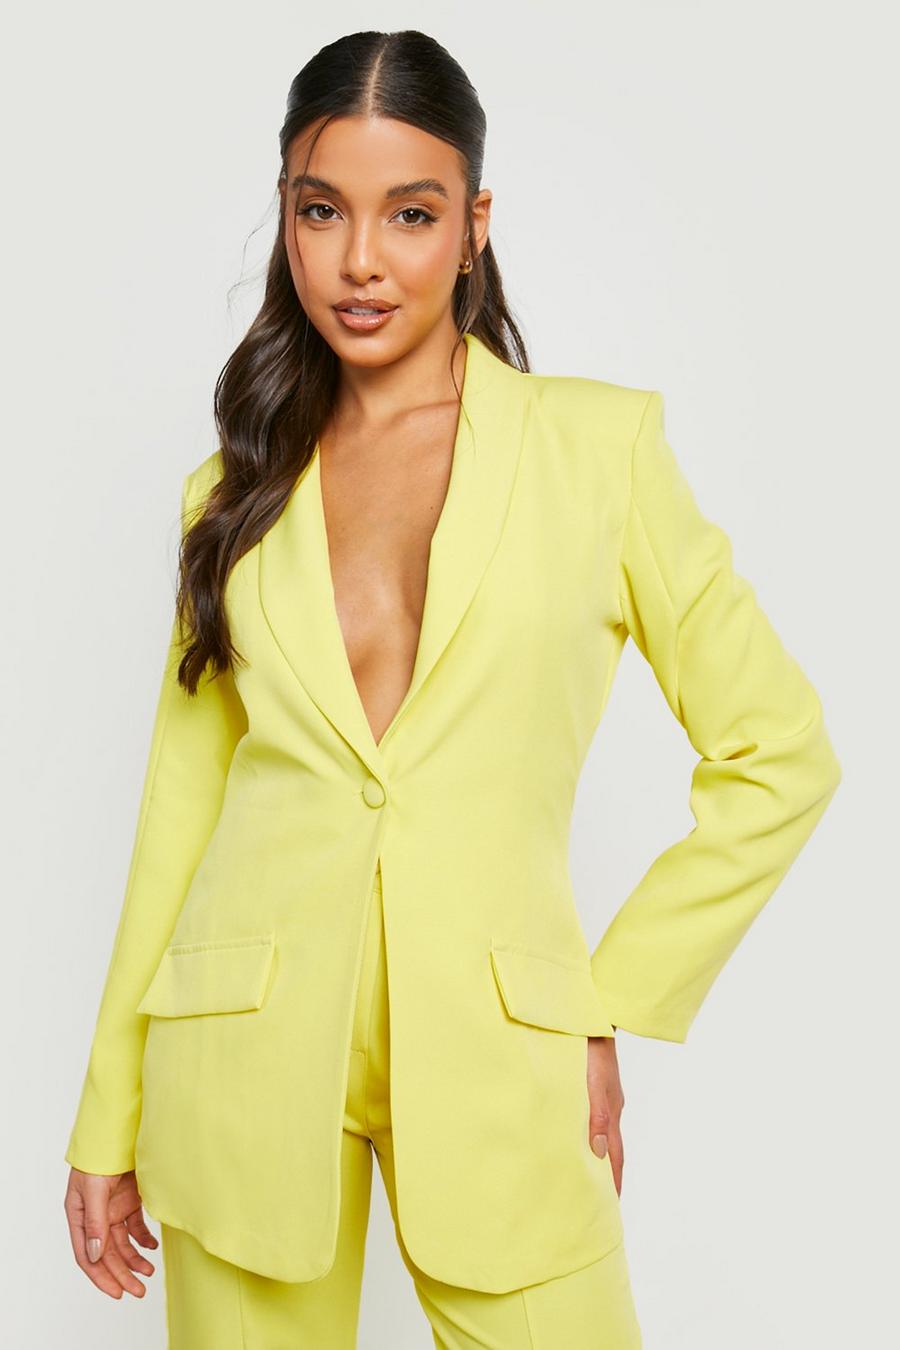 Lemon yellow Plunge Front Fitted Tailored Blazer